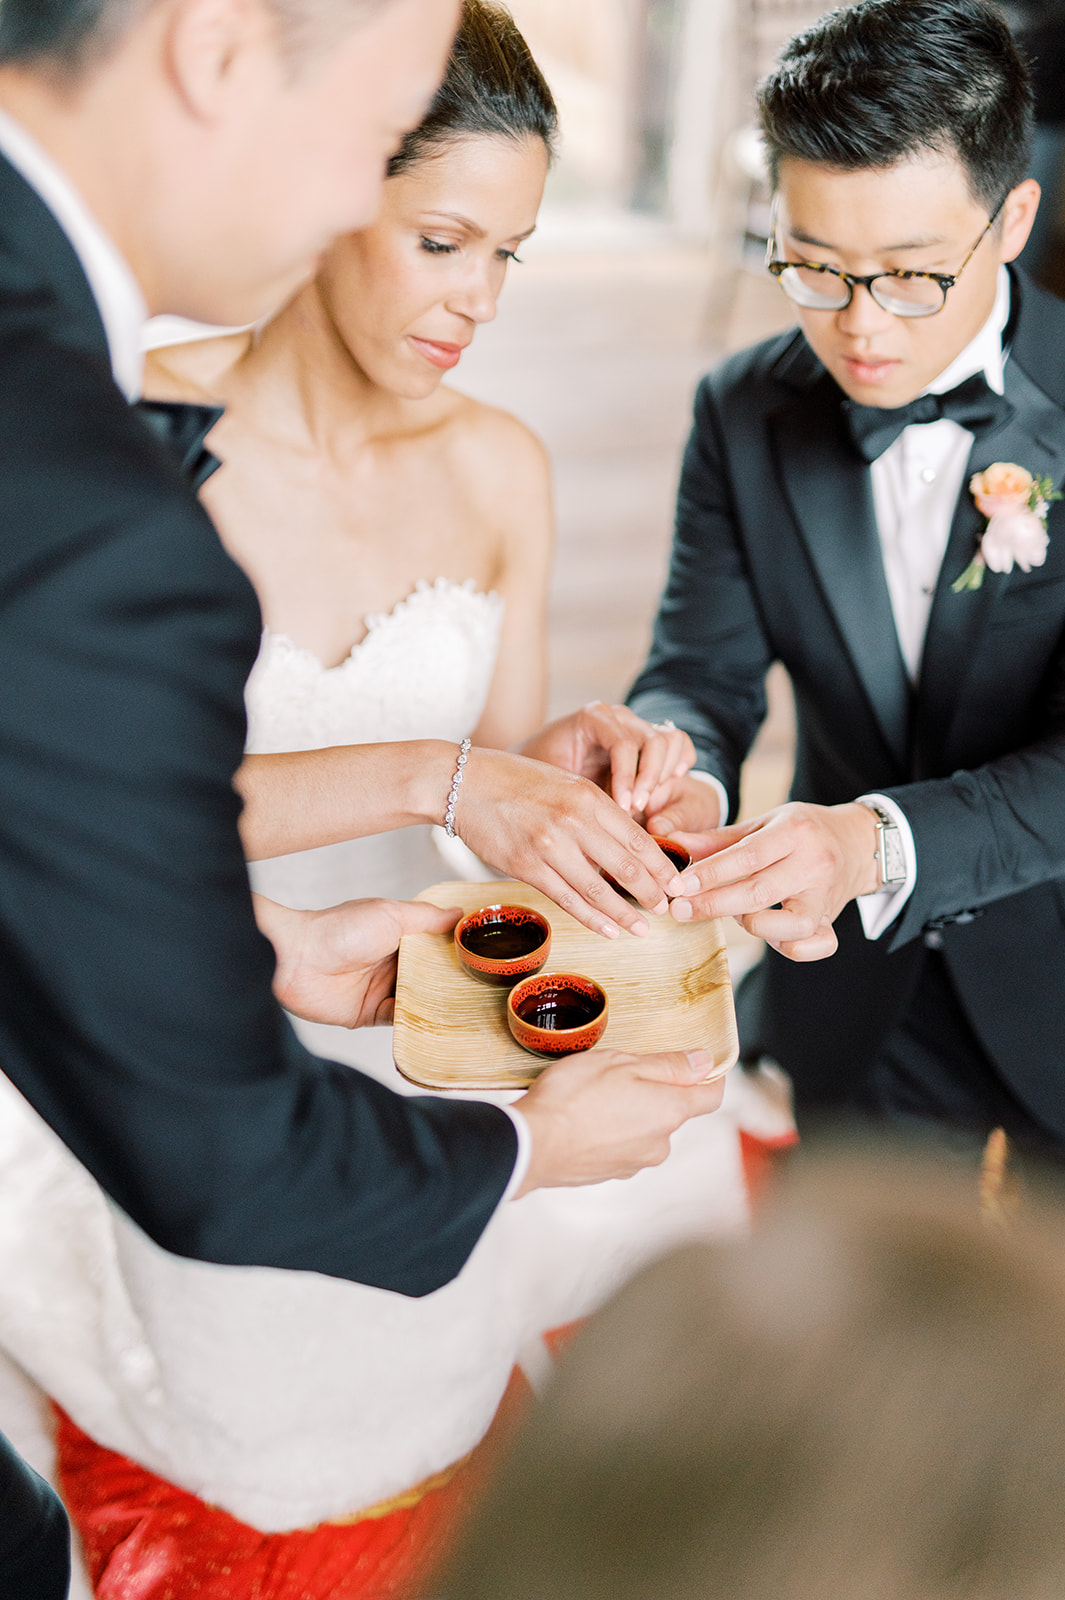 bride and groom share a cup for traditional tea ceremony at their spring Bartram's Garden wedding in Philadelphia, PA